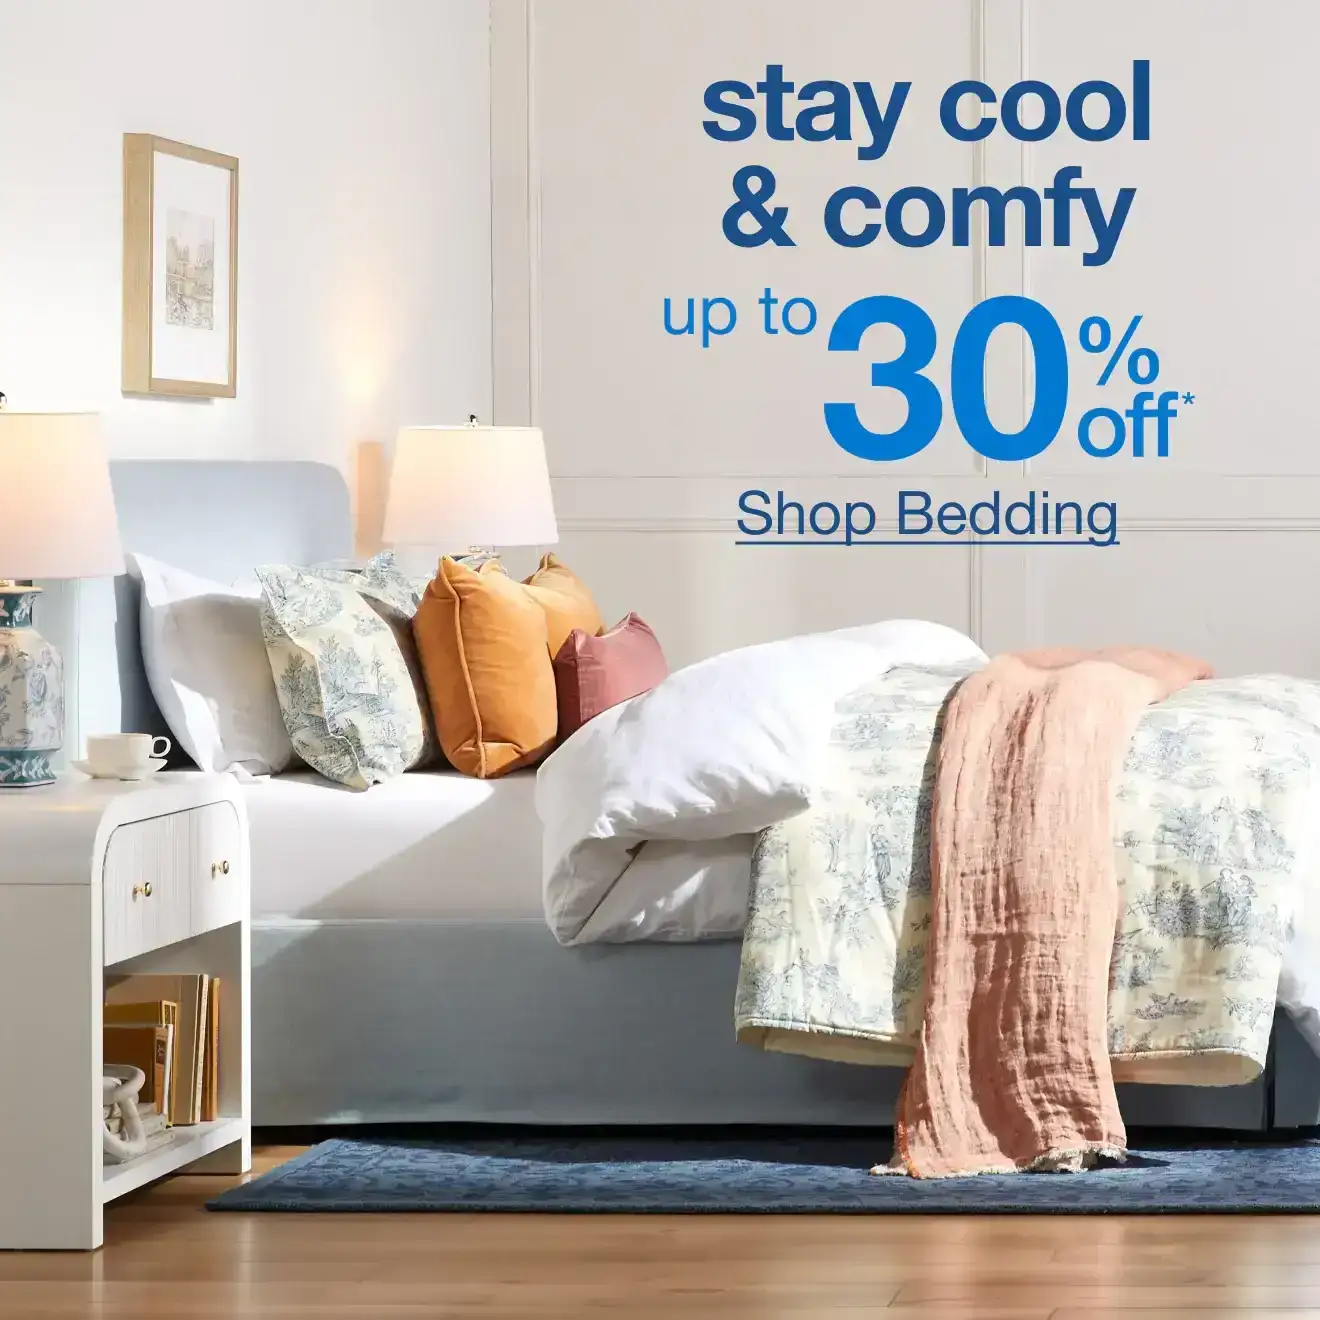 Up to 30% off Bedding - Shop Now